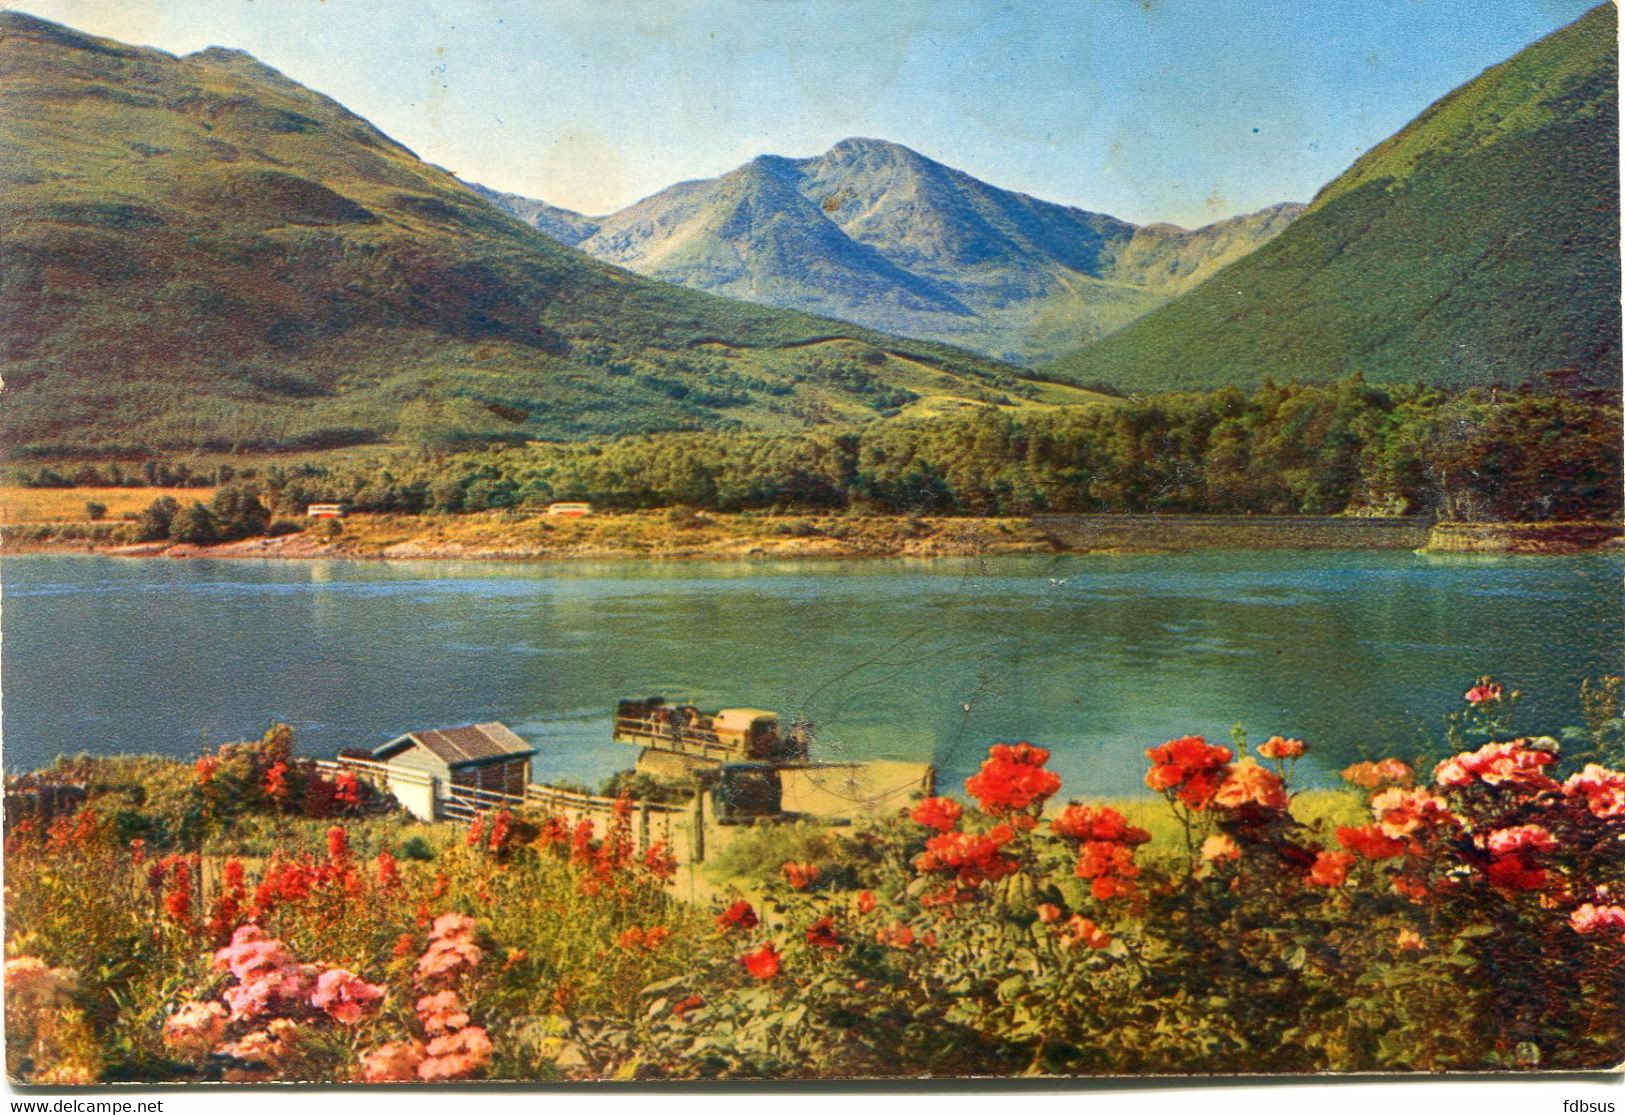 1969 Ballachulish Ferry And Sgurr Dhonuill - Ed. Millar And Lang Ltd 115 - REF 176 - Card To Belgium - Inverness-shire